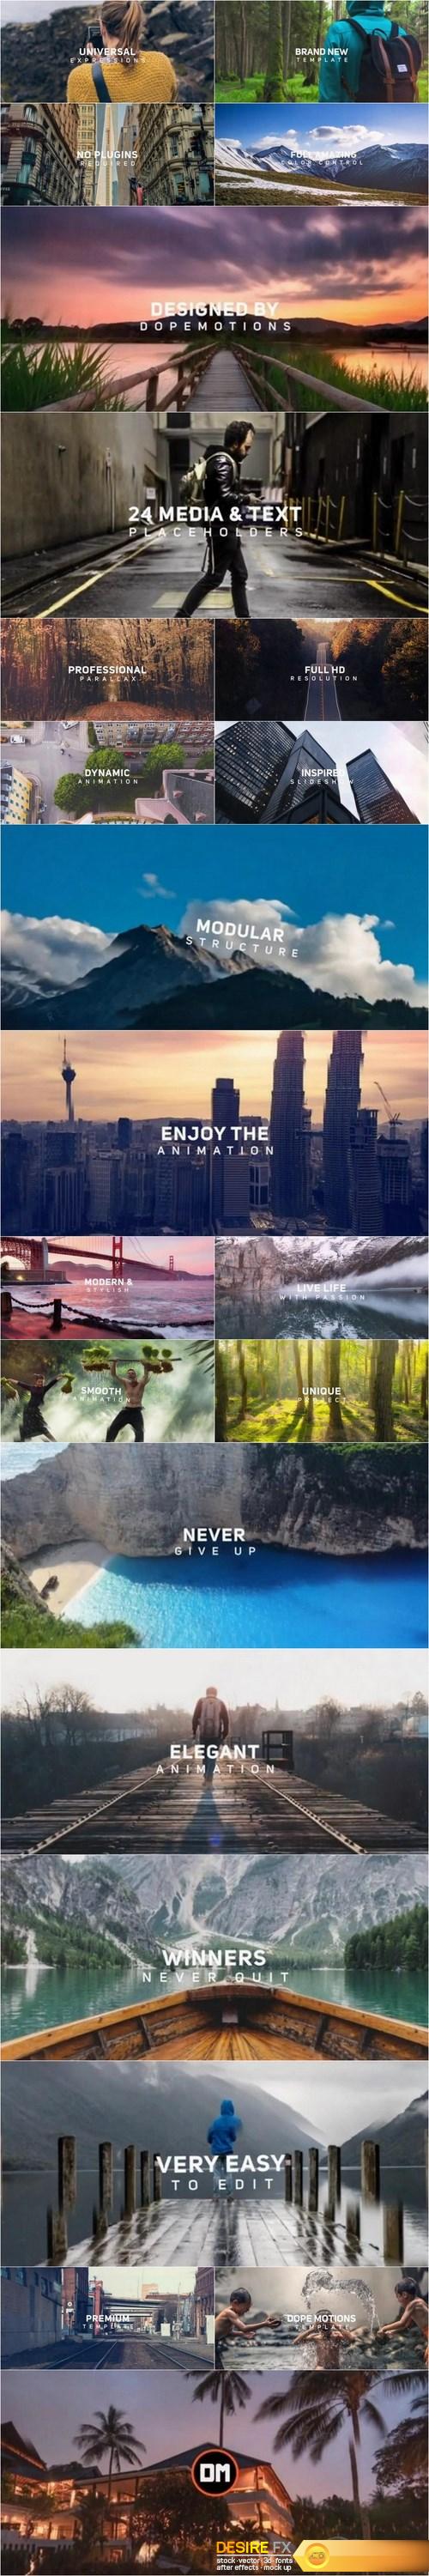 Amazing Parallax Slideshow After Effects Templates